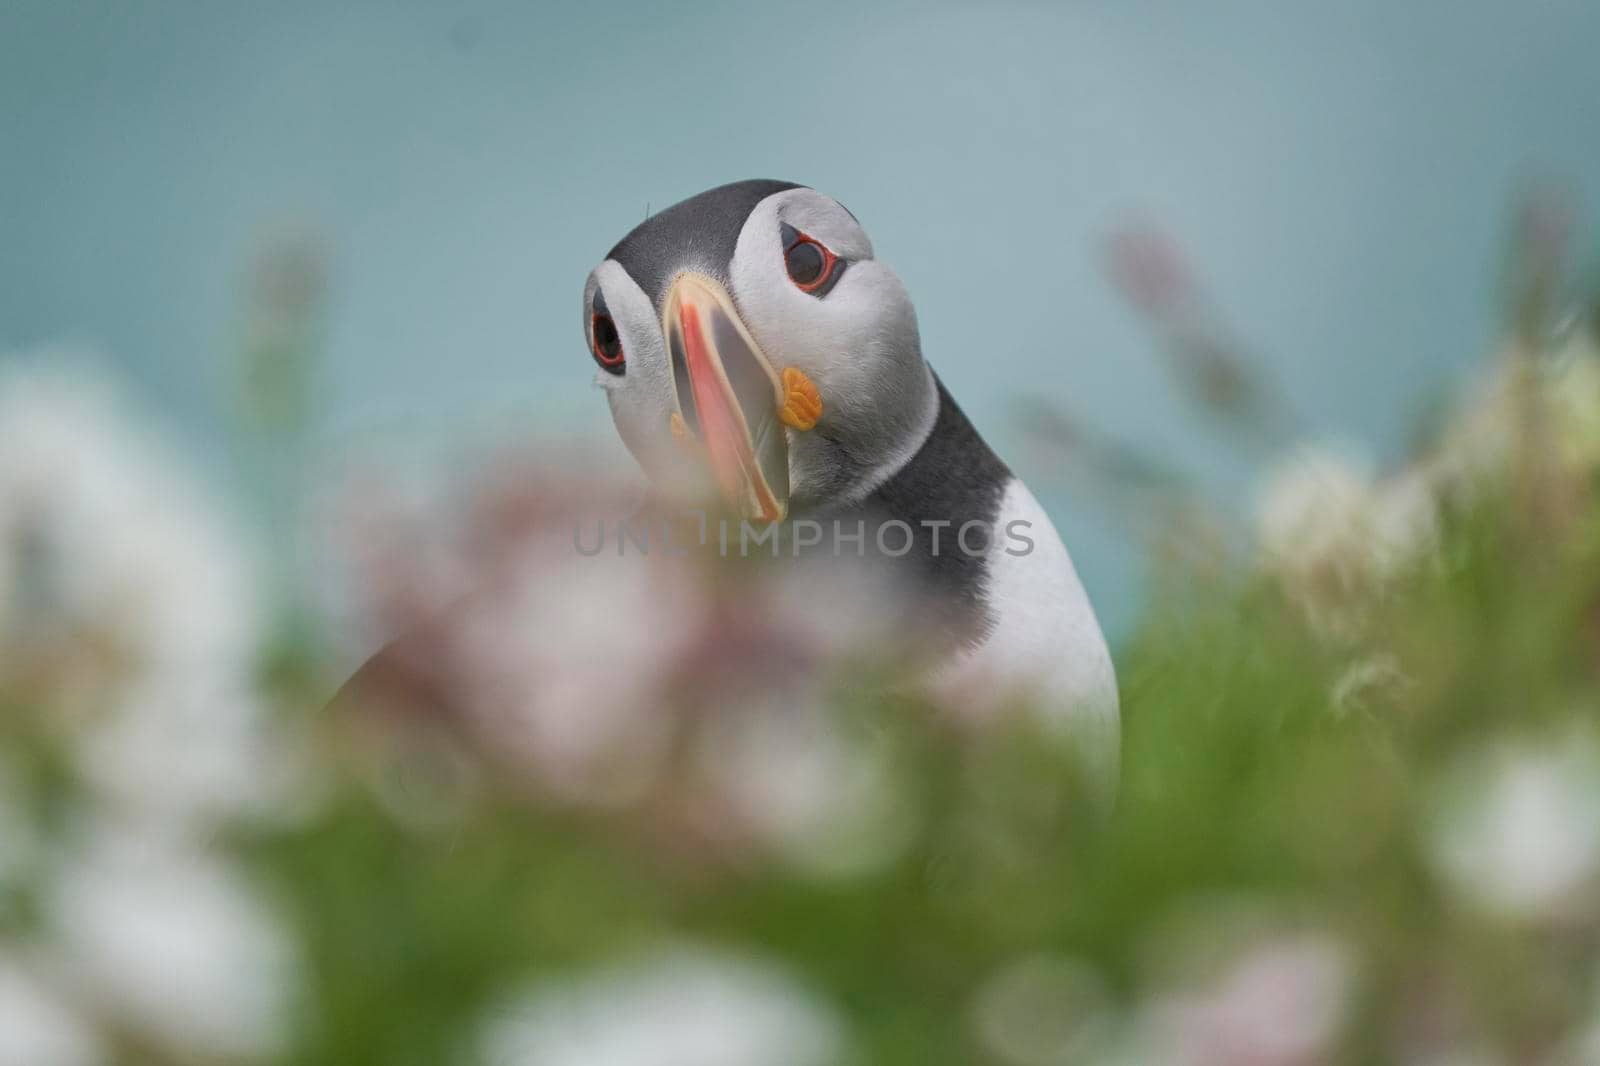 Atlantic puffin (Fratercula arctica) amongst spring flowers on a cliff on Great Saltee Island off the coast of Ireland.